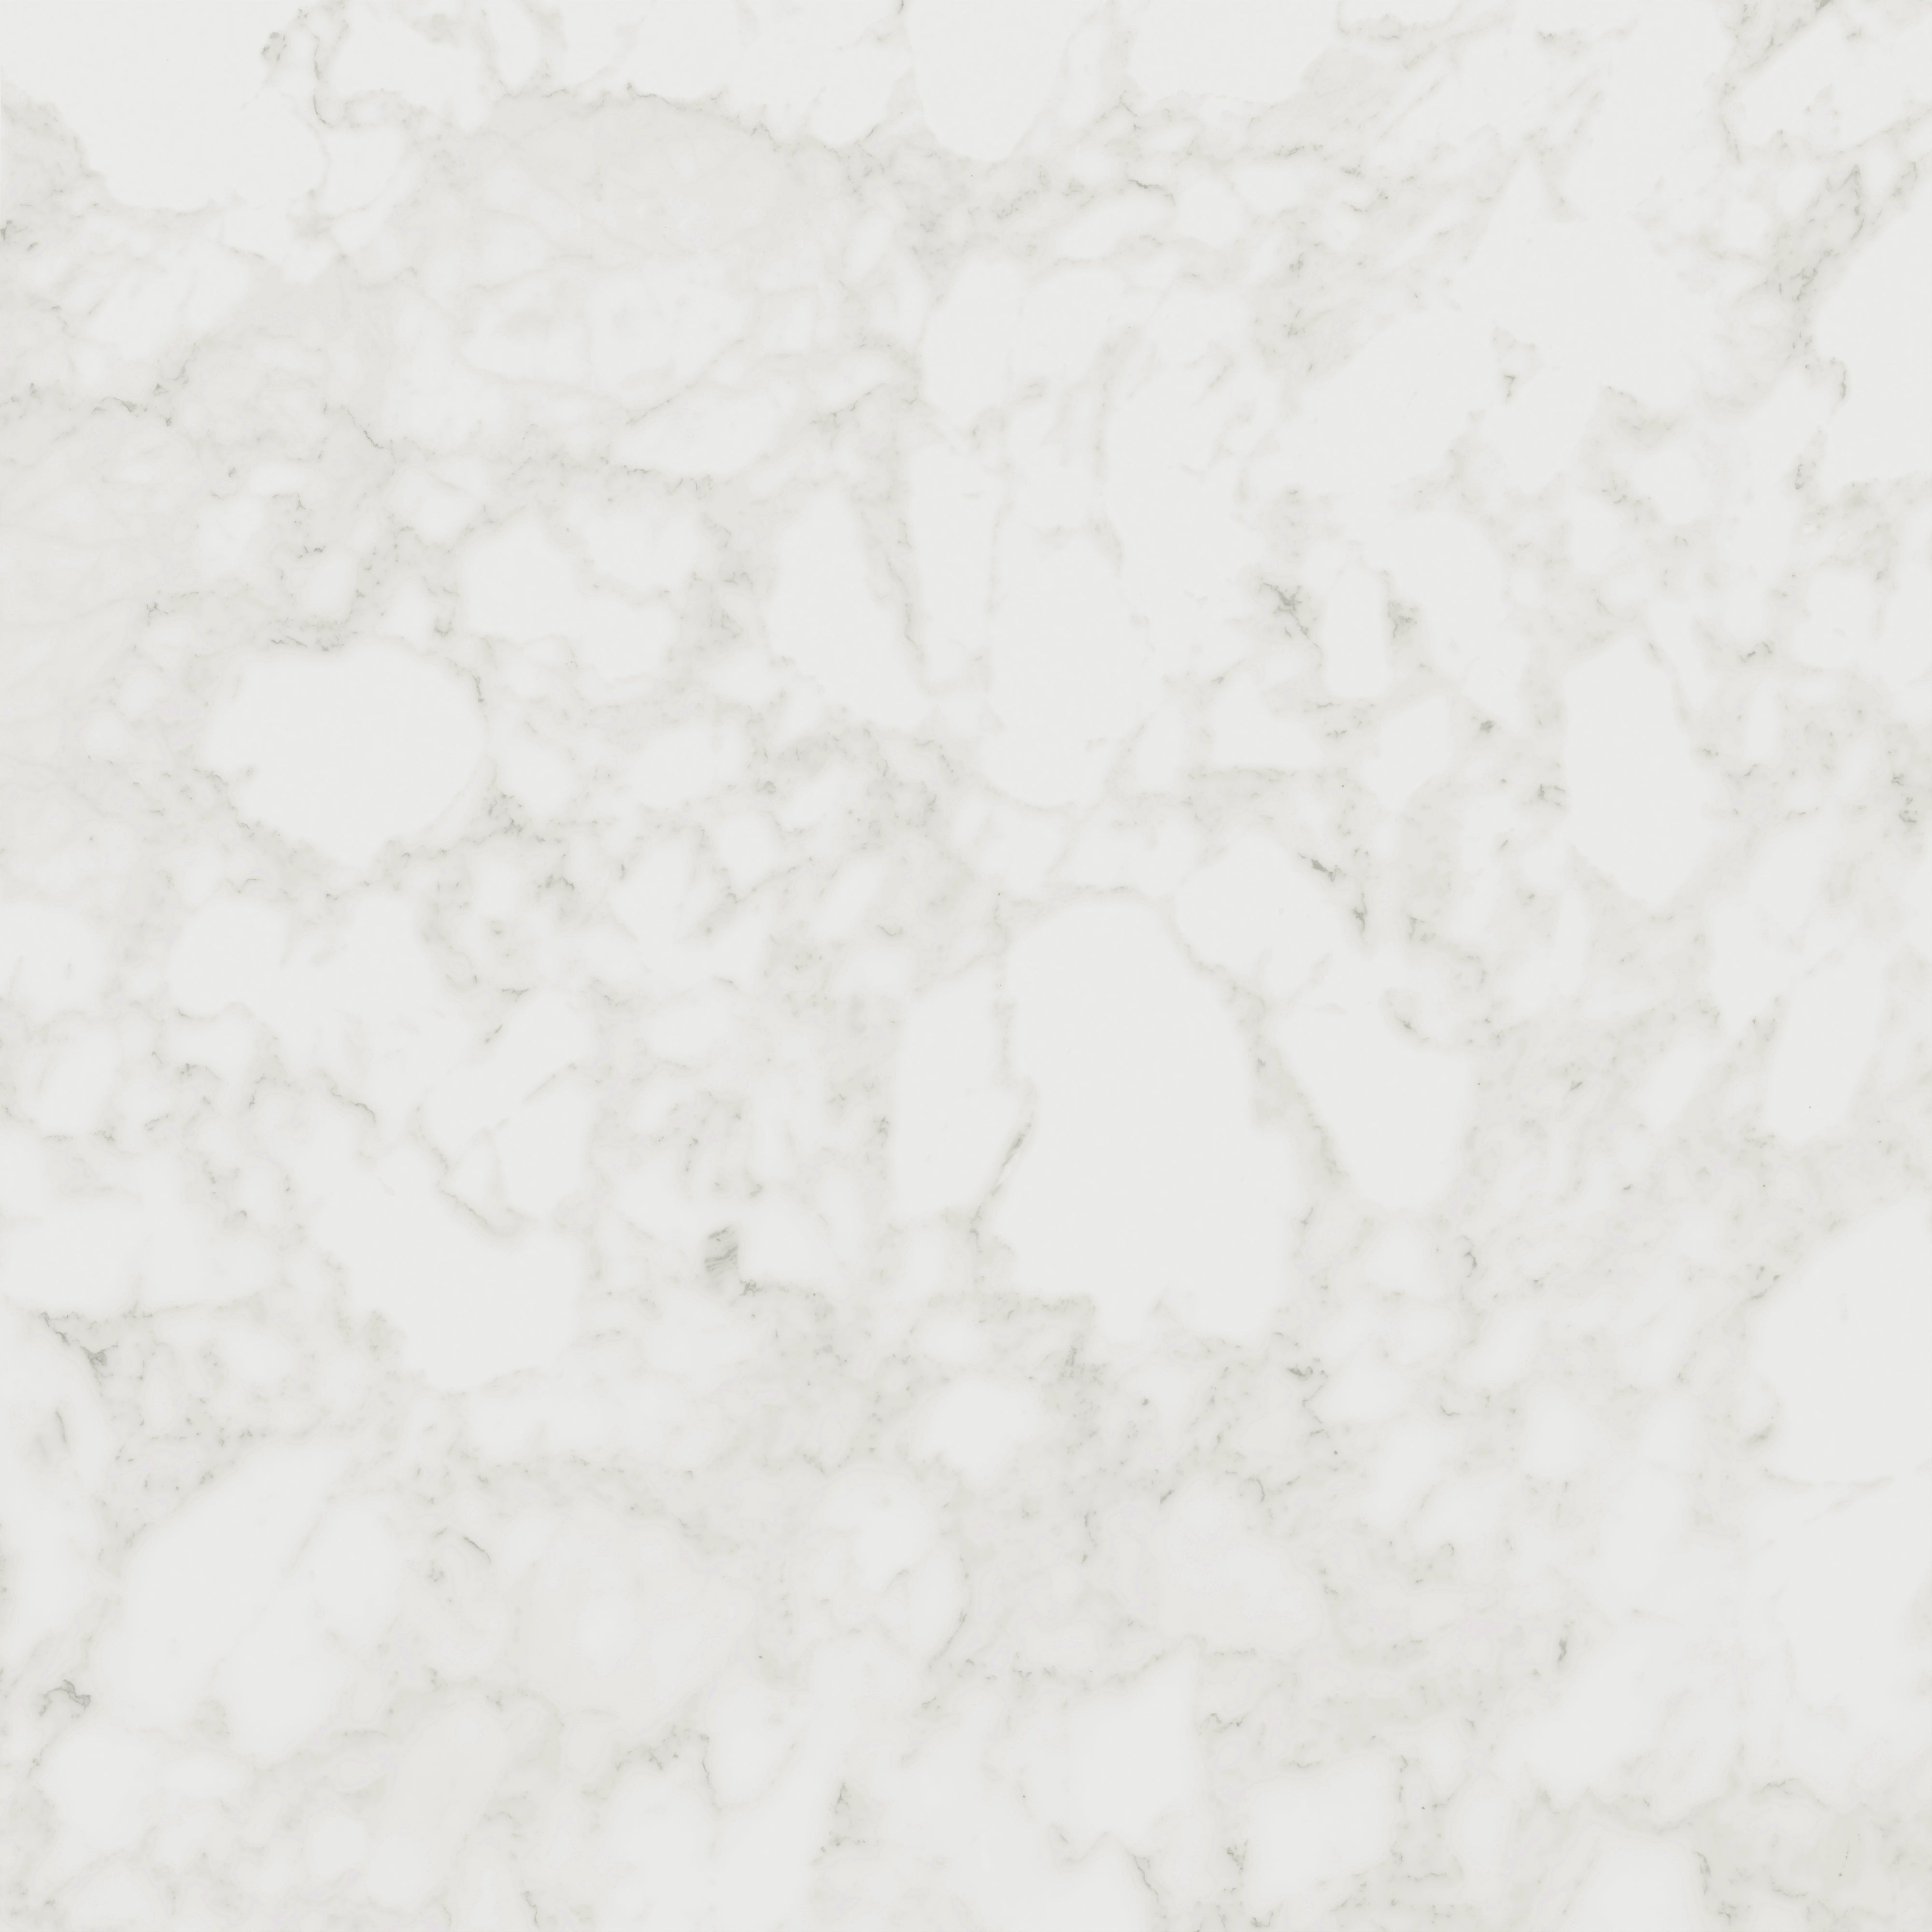 Aniston Carrara Bianco Marble-Look Porcelain Tile features soft grey veining on a crisp white backdrop, adding a touch of timeless elegance to any space.